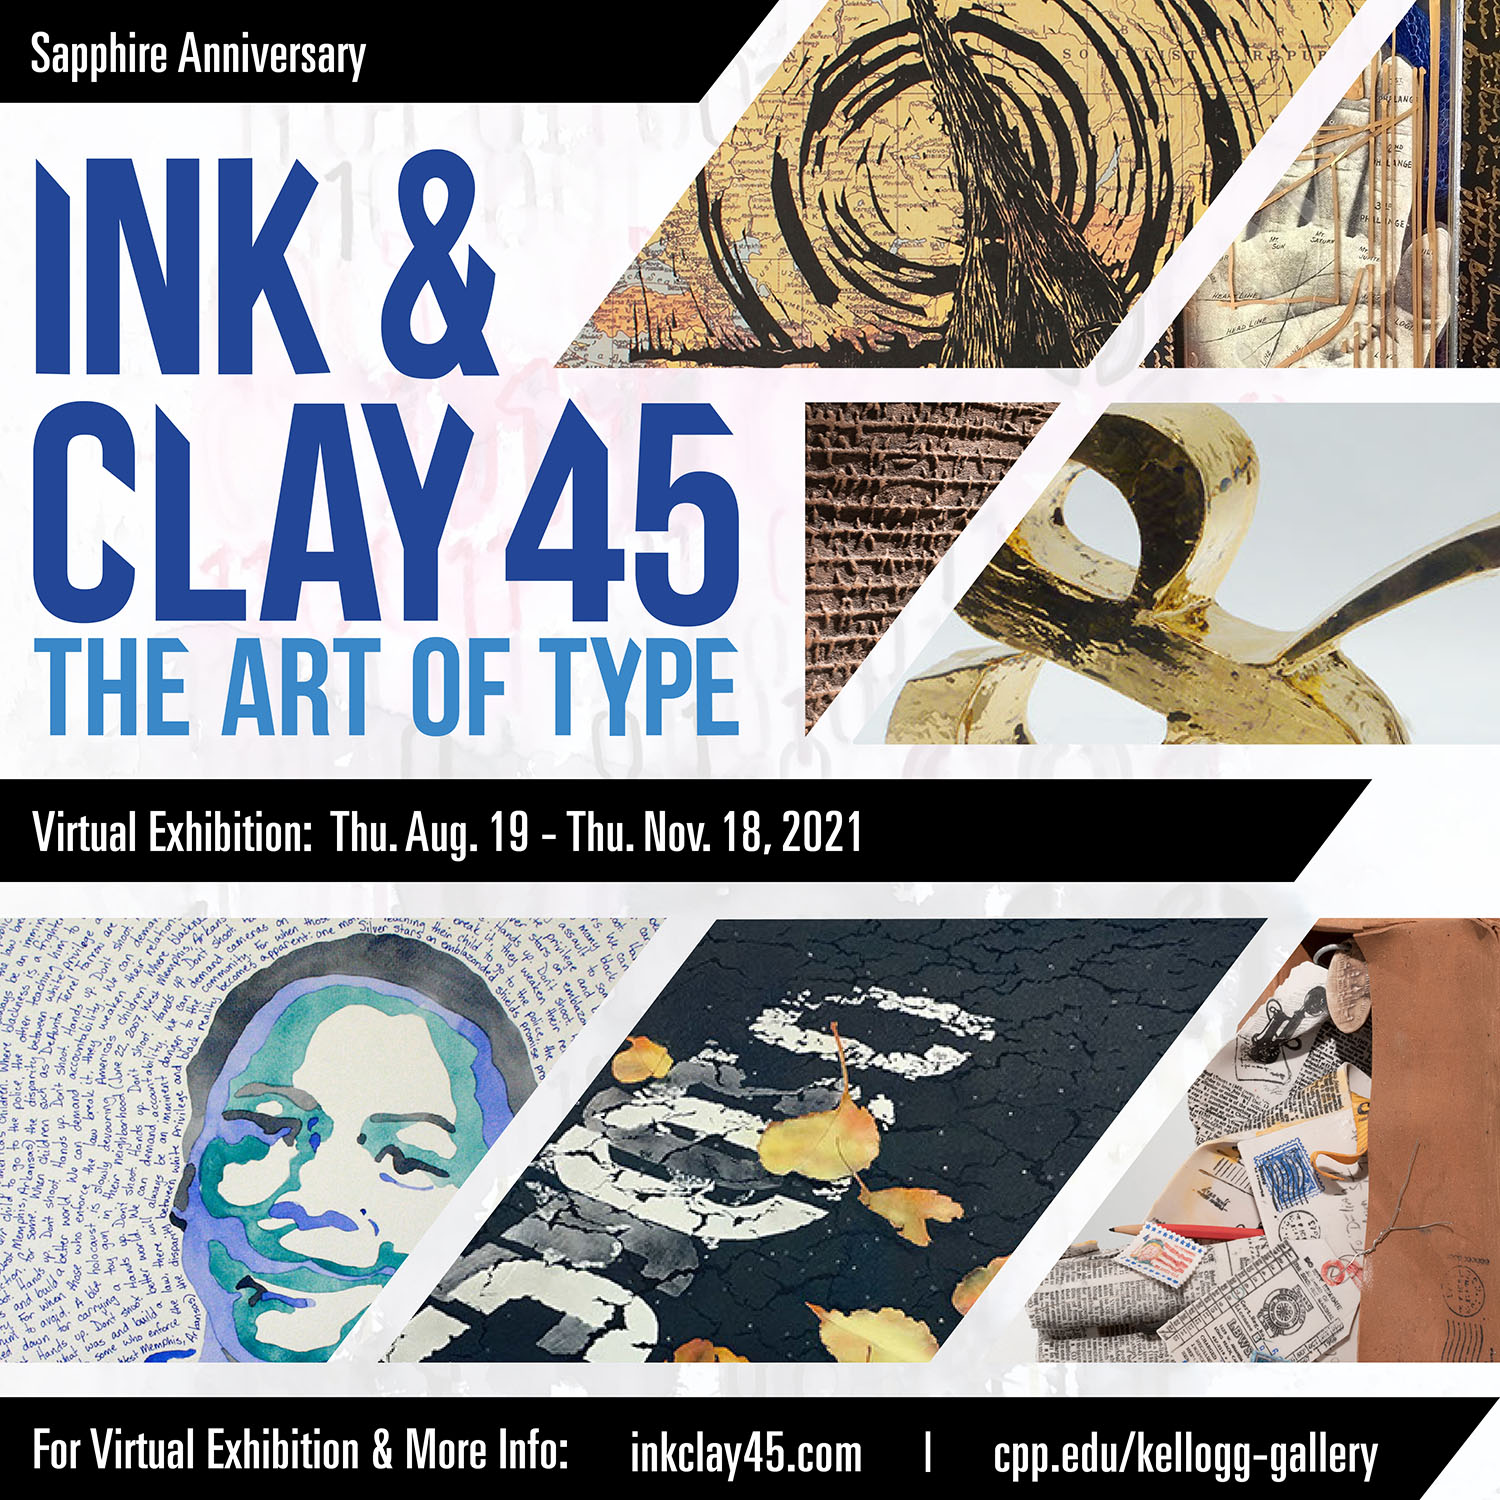 Sapphire Anniversary Ink & Clay 45: The Art of Type Virtual Exhibition: Thu. Aug. 19 - Thu. Nov. 18, 2021 For Virtual Exhibition & More Info: inkclat45.com | cpp.edu/kellogg-gallery